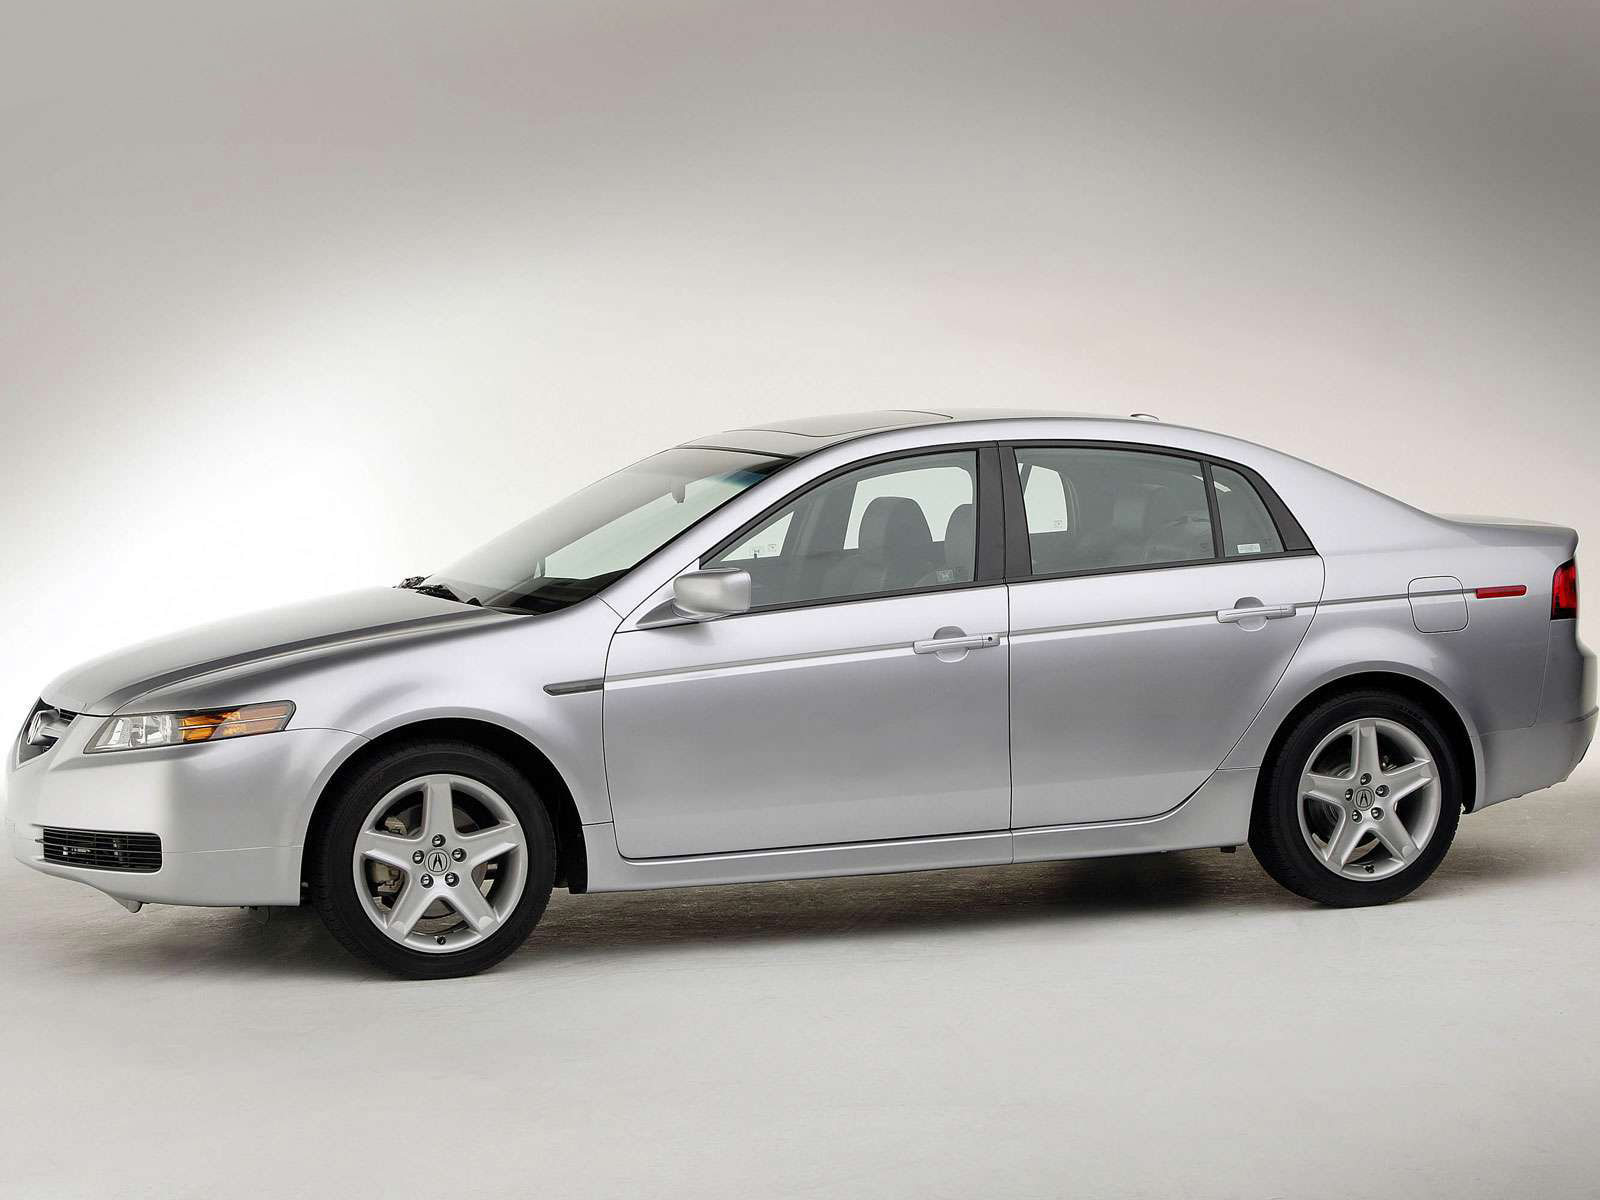 2005 Acura TL related infomation,specifications - WeiLi Automotive Network